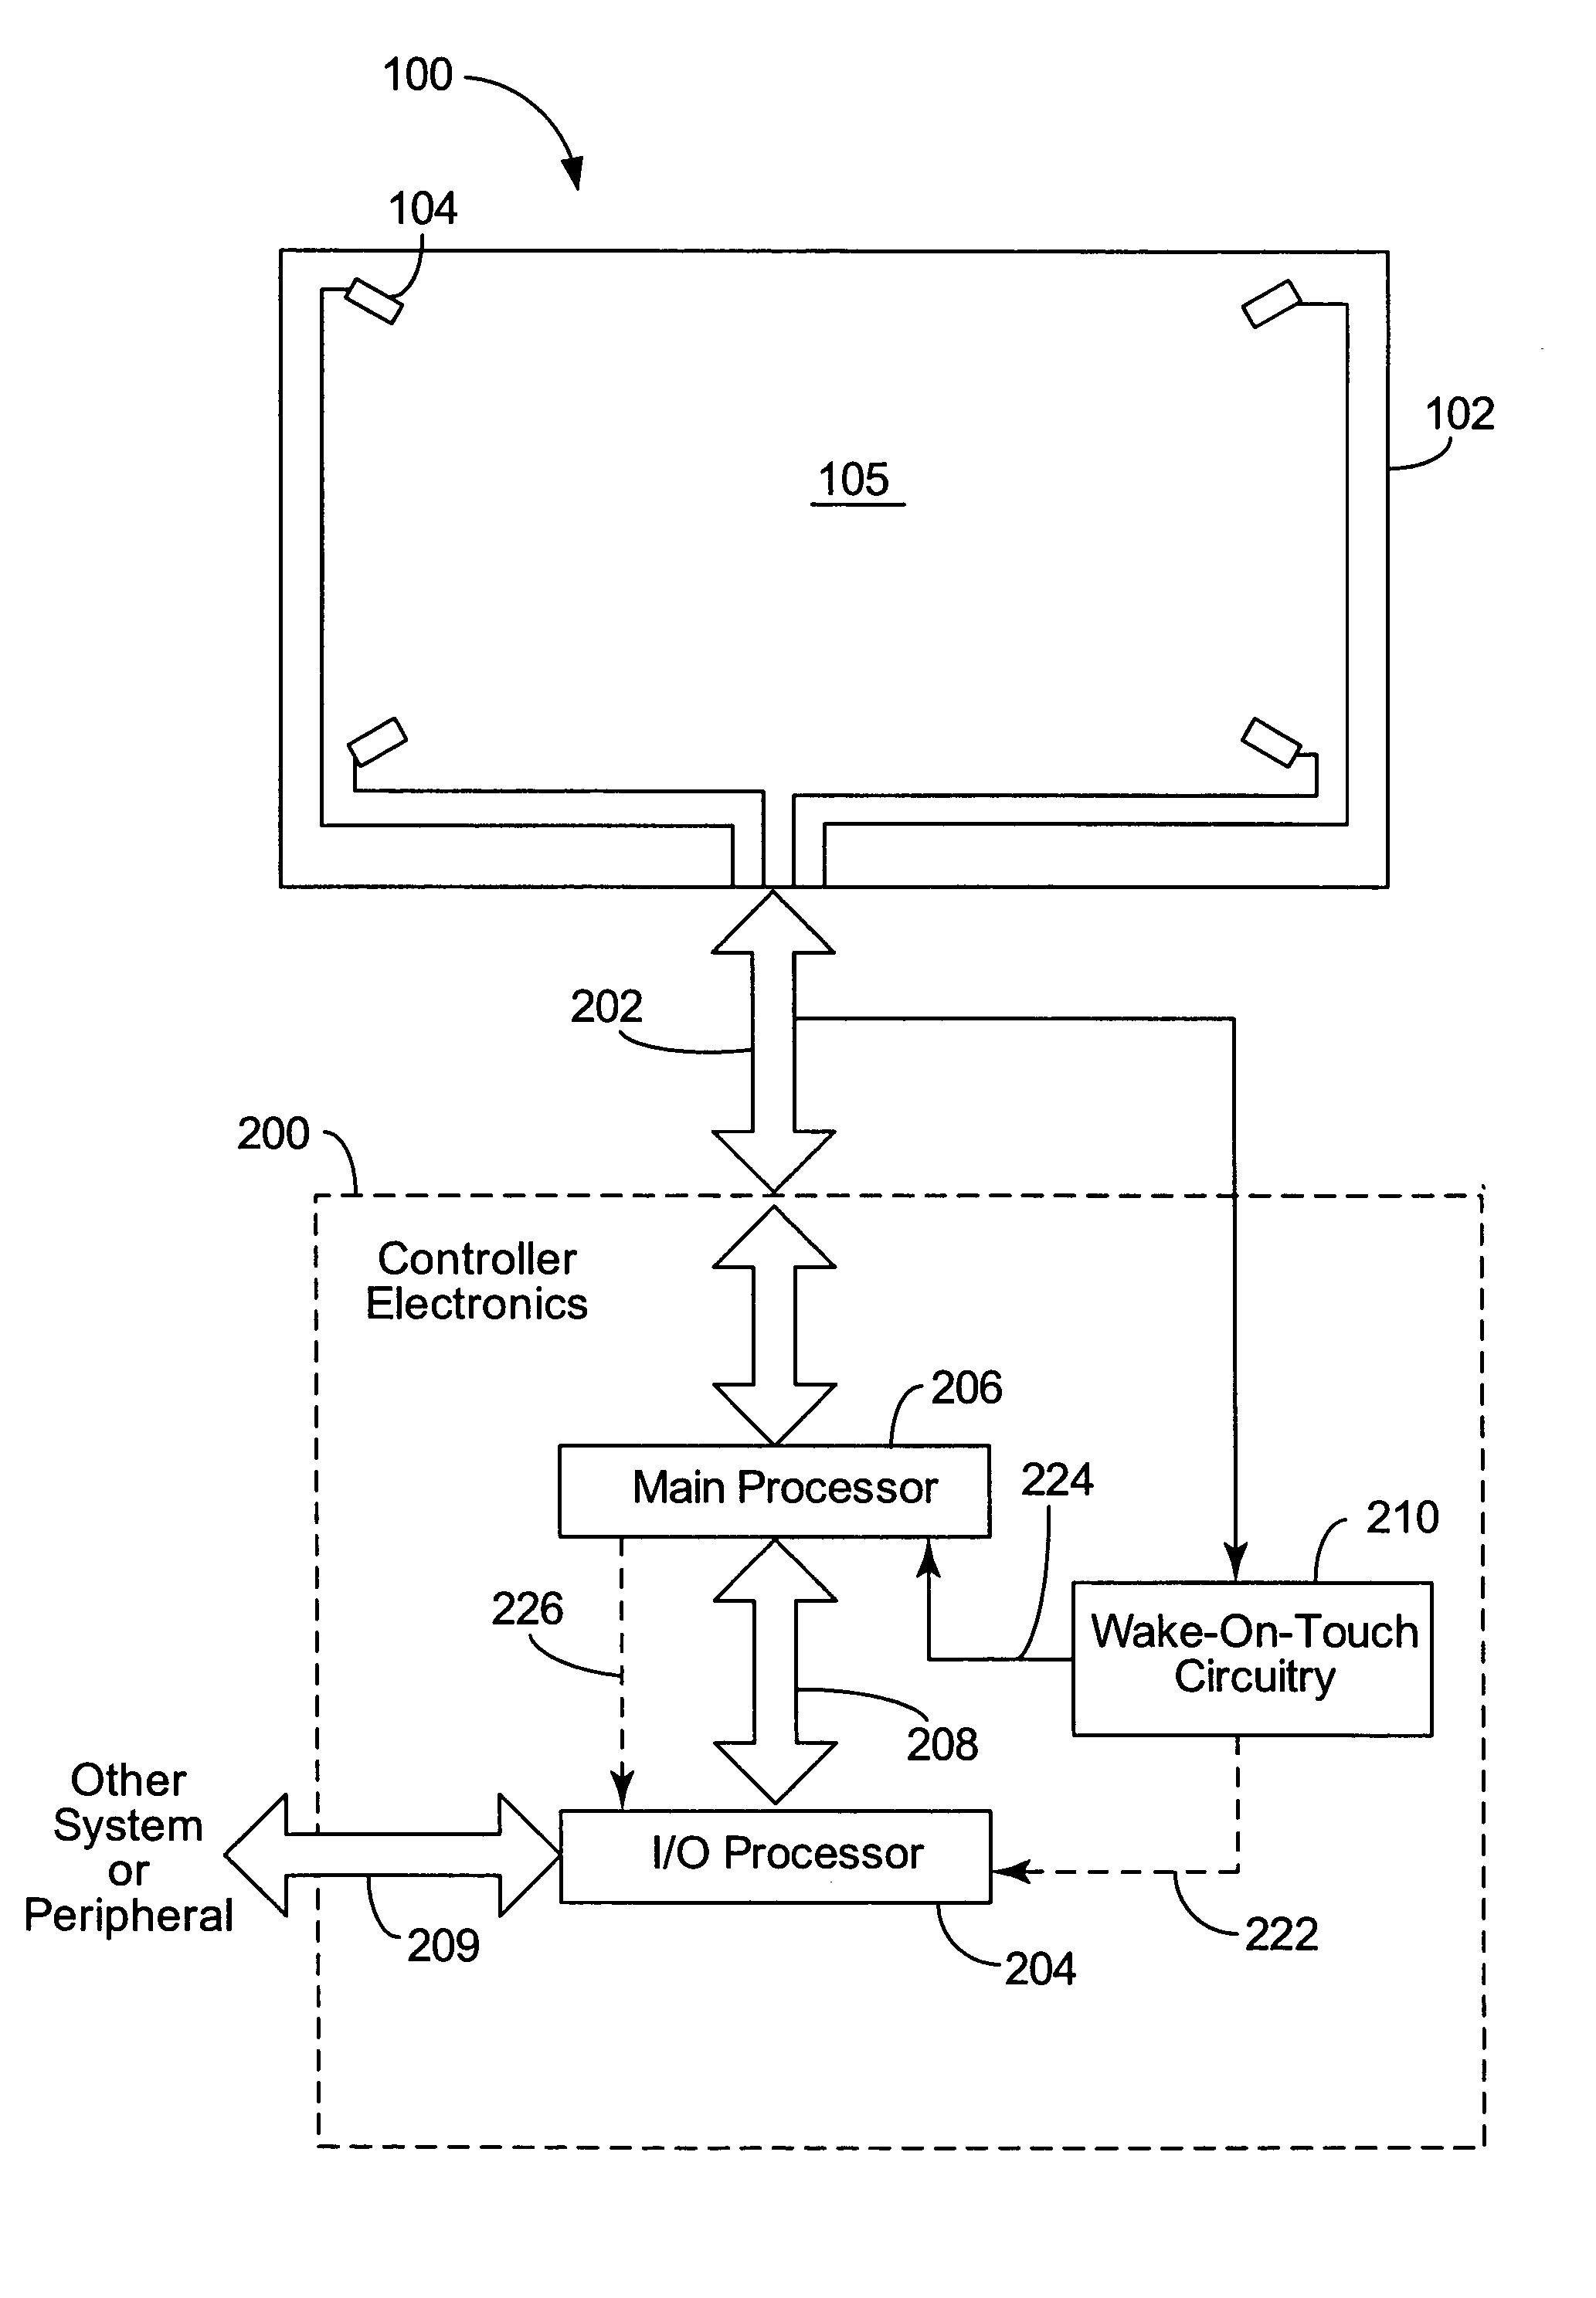 Wake-on-touch for vibration sensing touch input devices